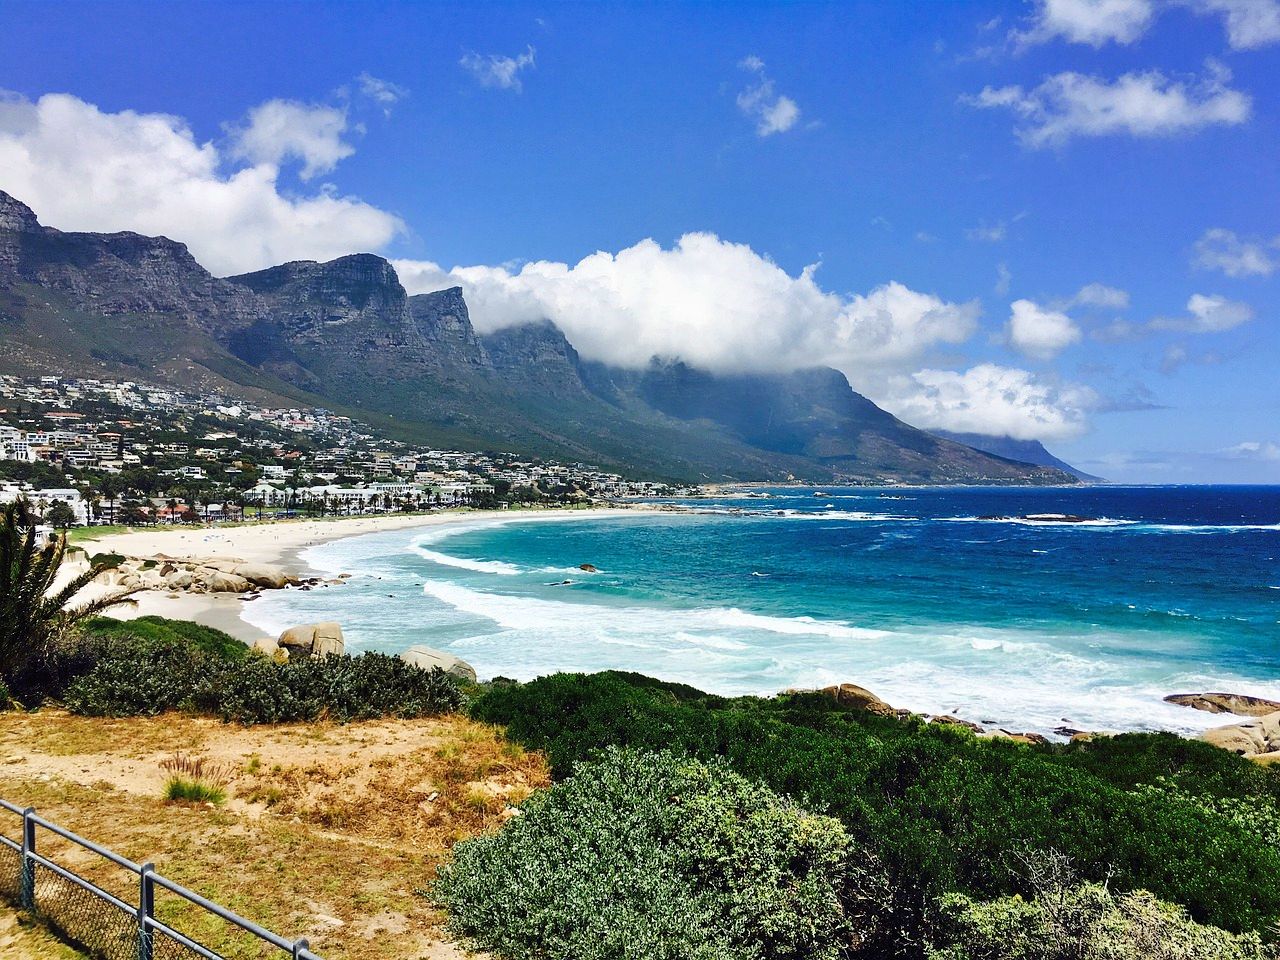 Camps Bay beach and the 12 Apostle Mountains